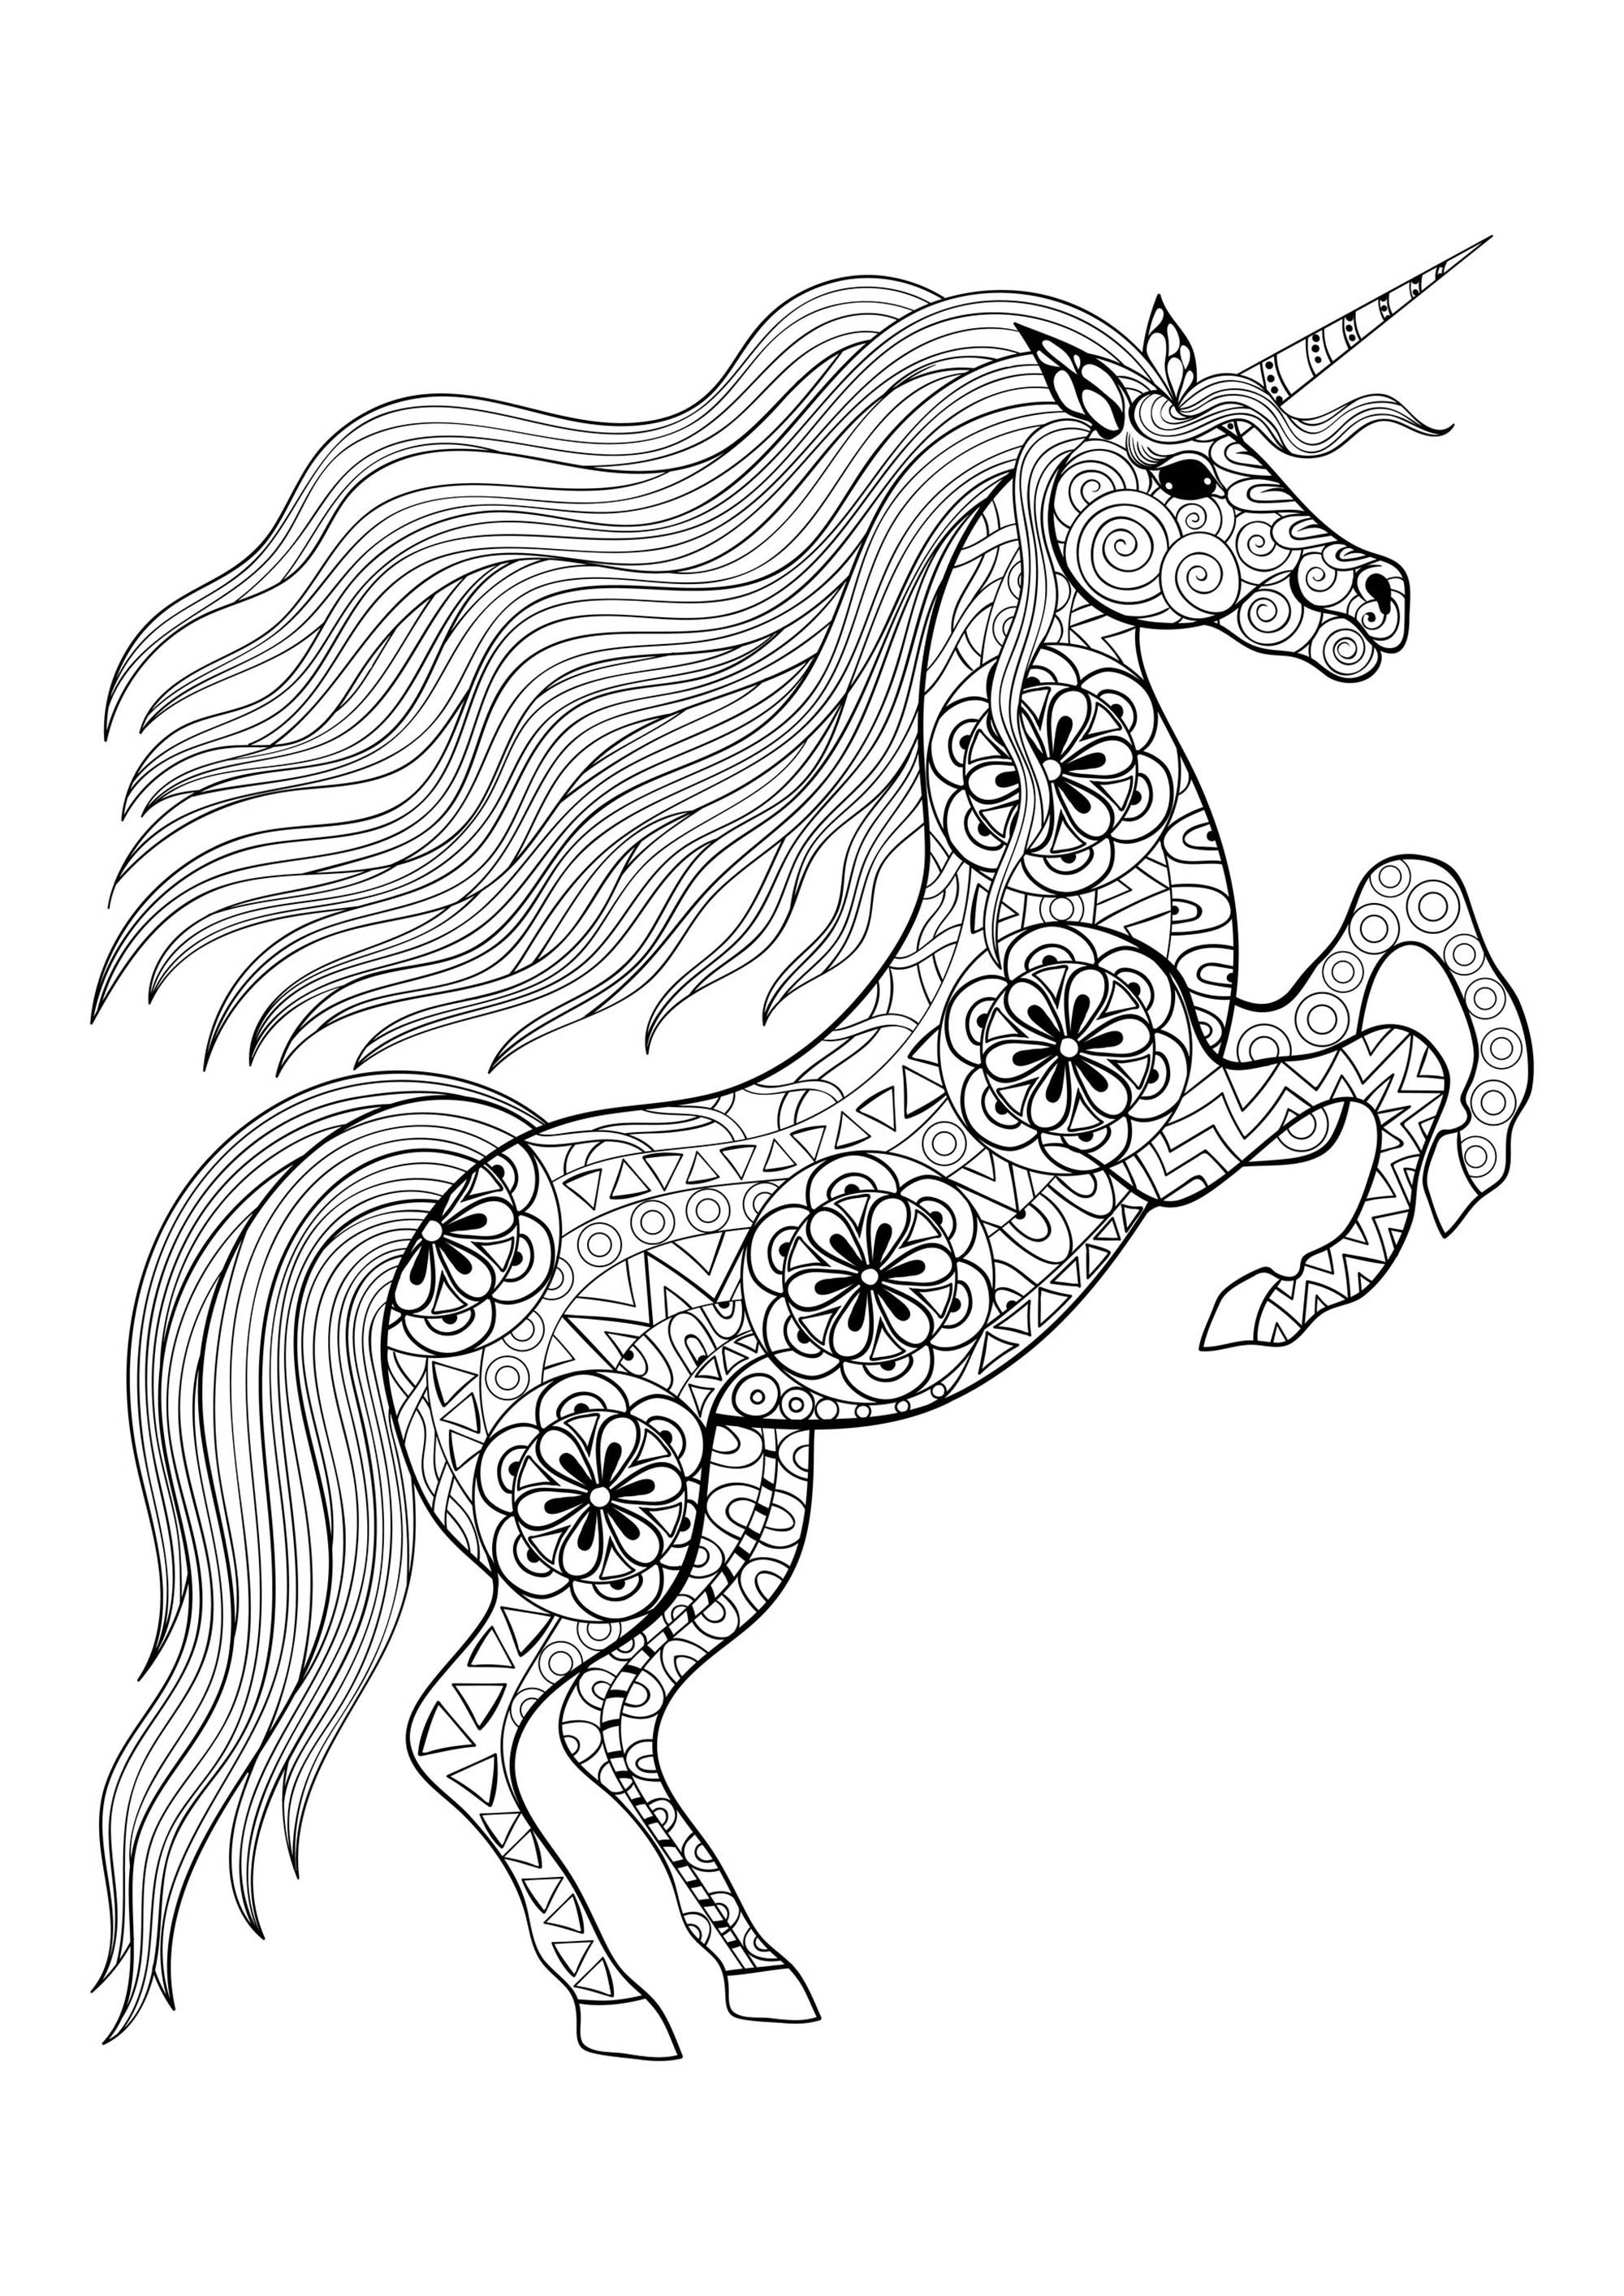 Majestic unicorn standing on two hind legs. Color the little mandalas and pretty motifs integrated into the body of this imaginary, fantastic creature, Source : 123rf   Artist : Ipanki